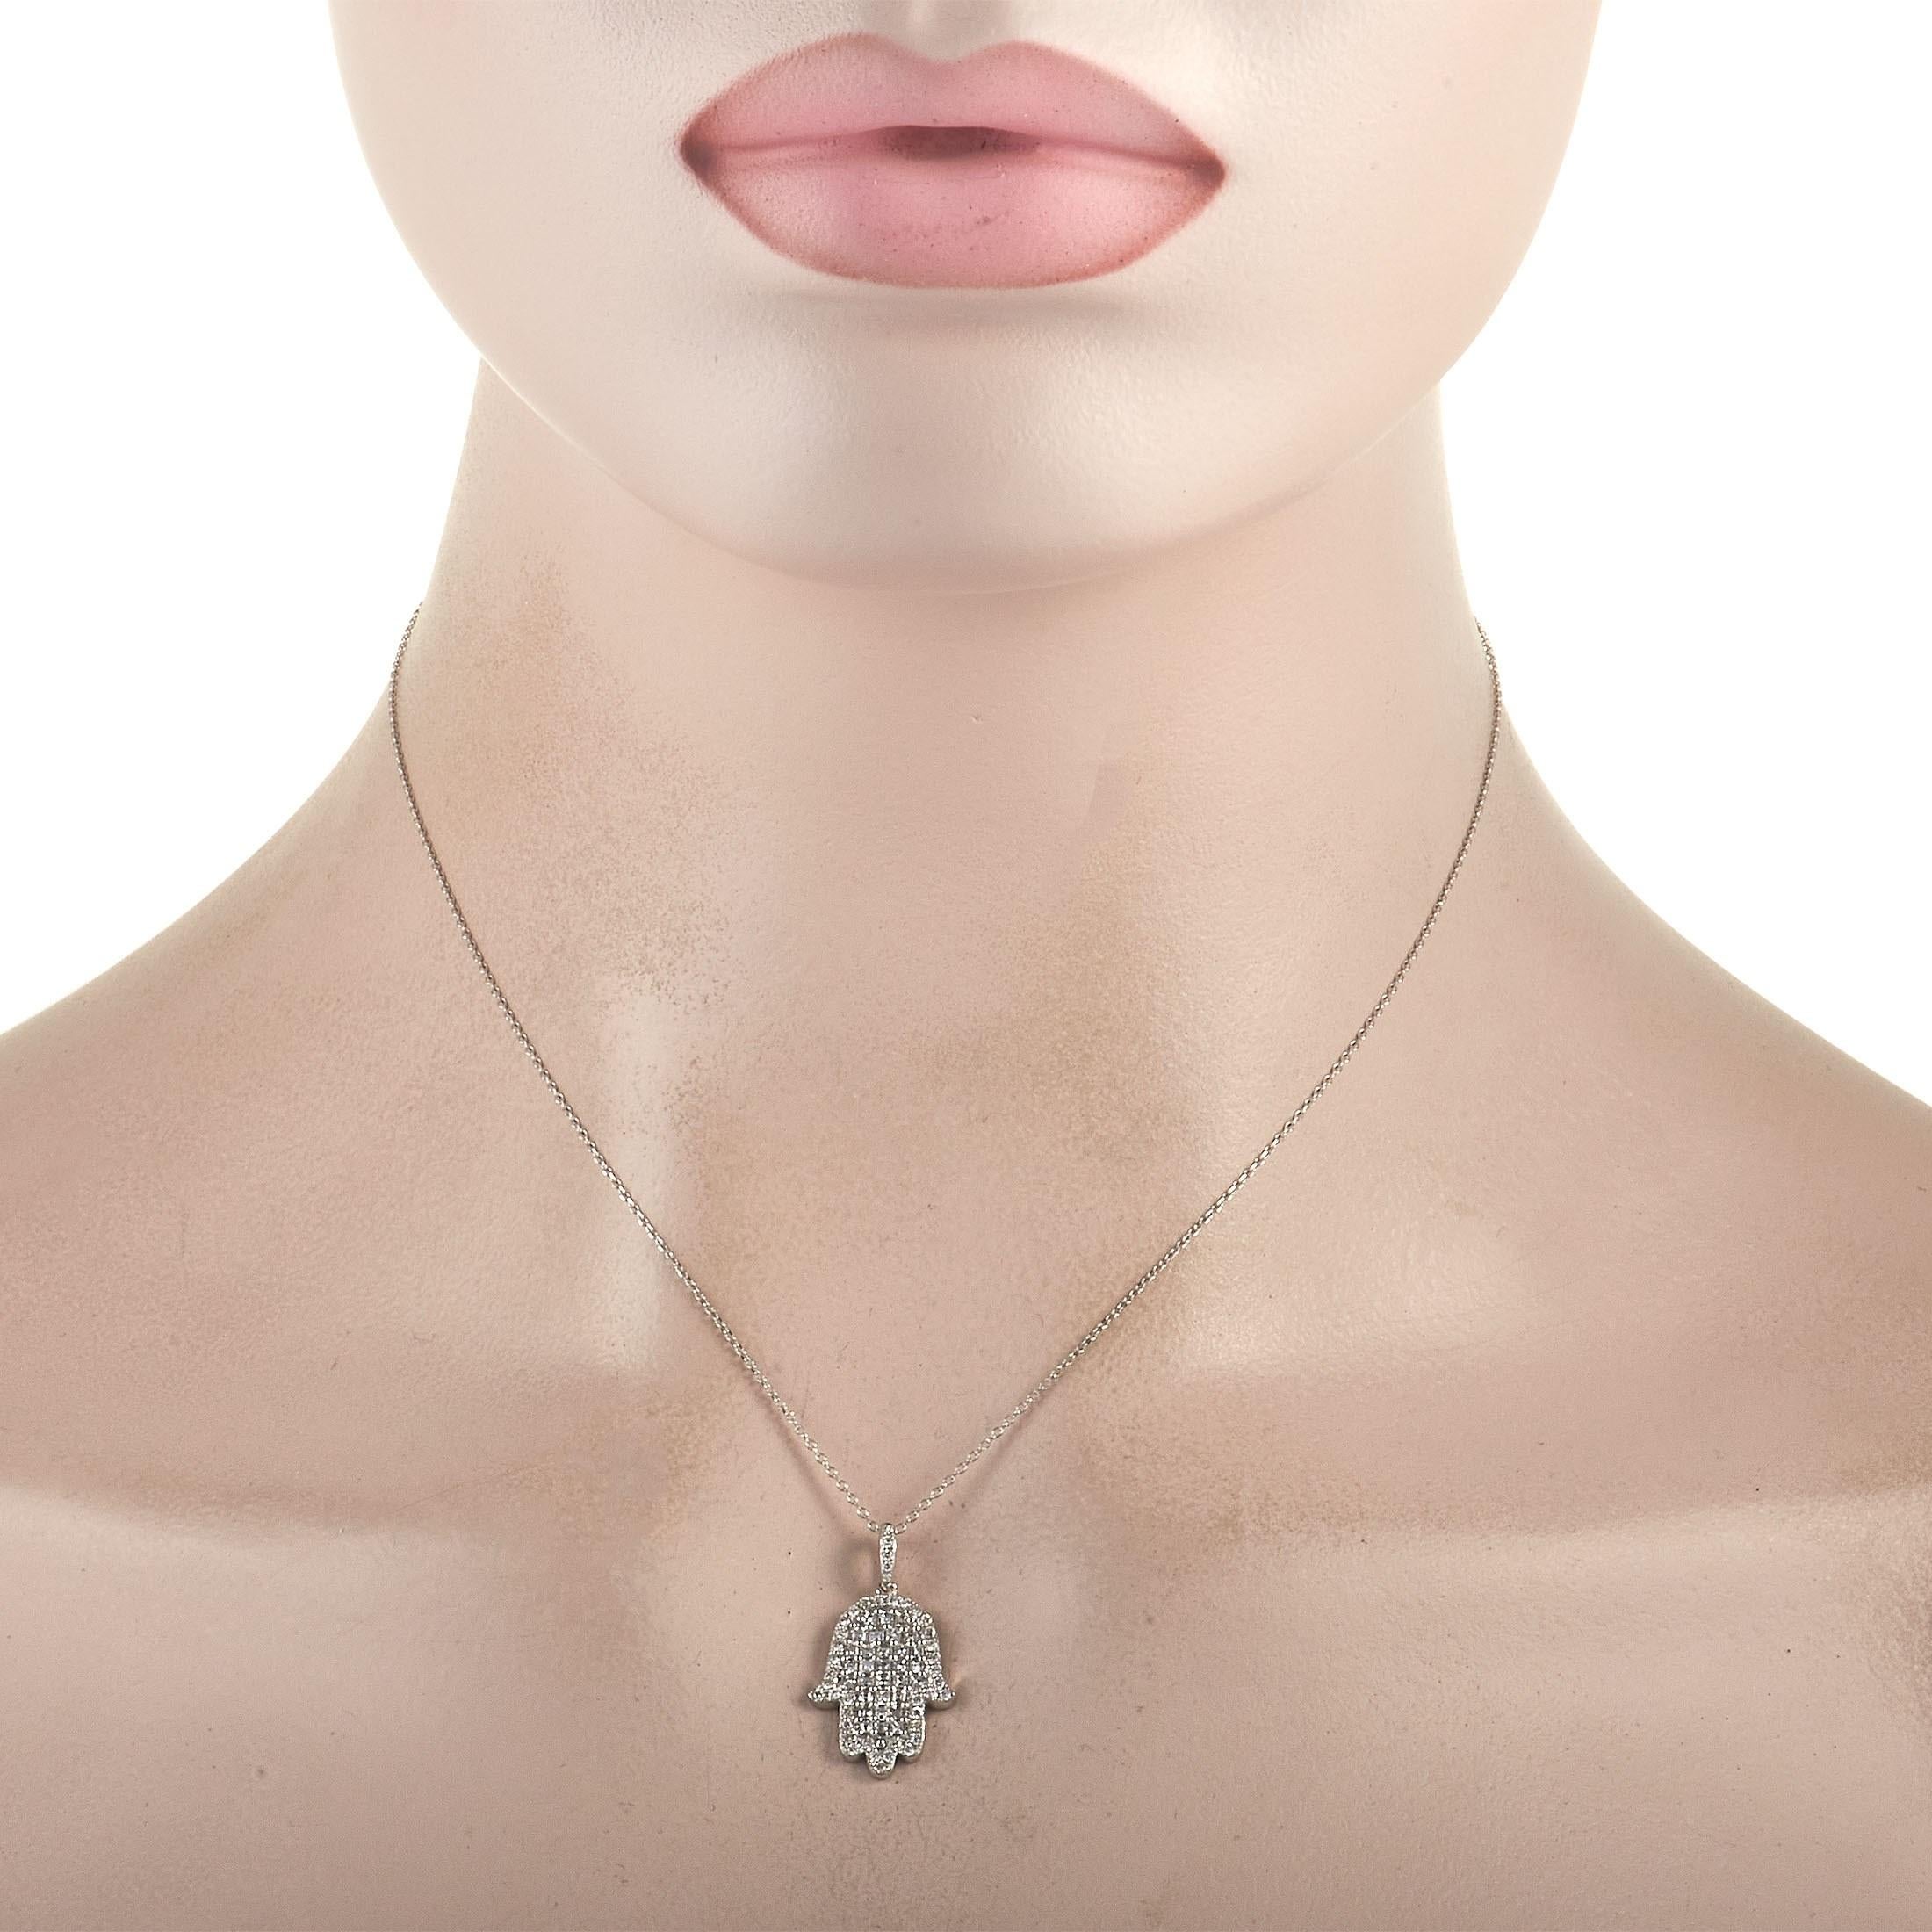 Wear this LB Exclusive 18K White Gold 0.90 ct Diamond Hamsa Necklace and make any outfit sparkle while attracting positive energy and good vibes. On a 16-inch long white gold chain is a sculpted Hamsa hand pendant completely covered in a combination